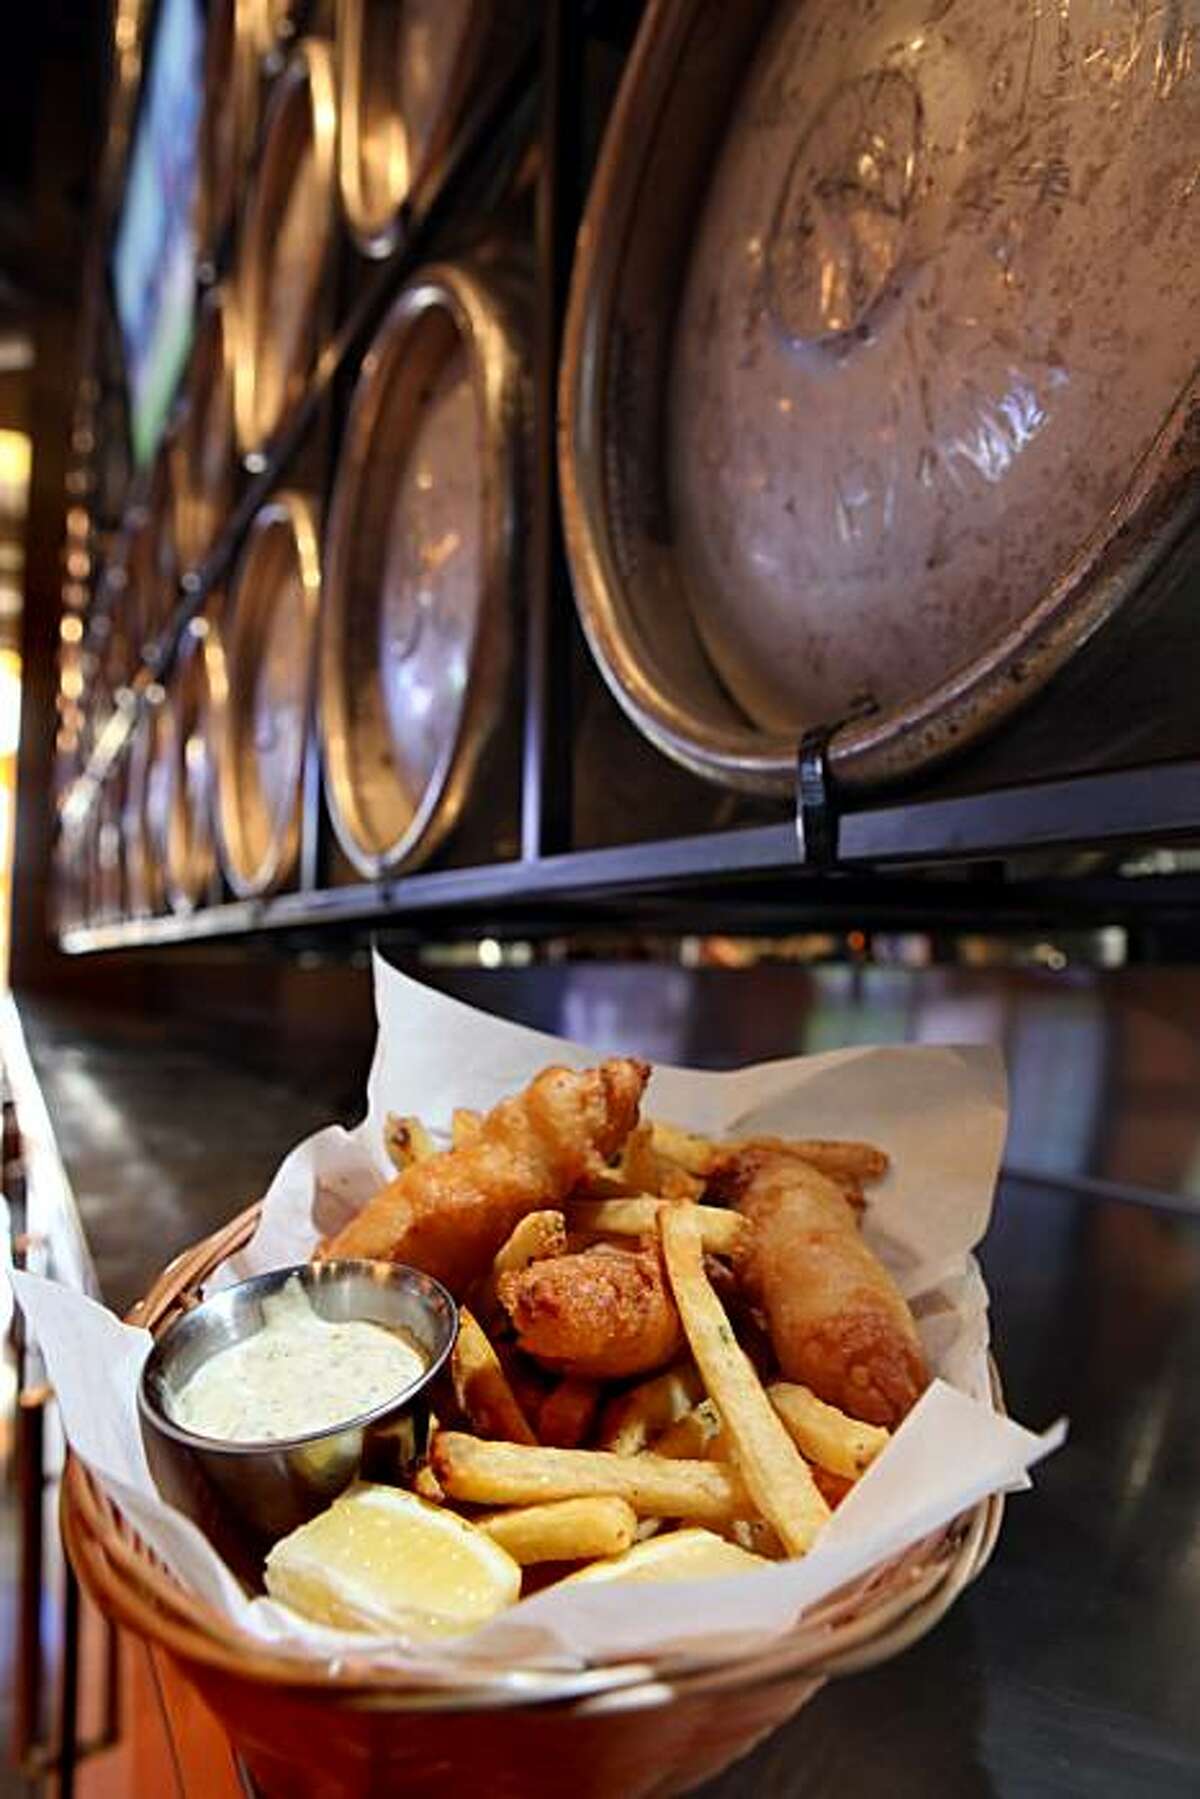 The fish and chips served at Public House in San Francisco, Calif., on Wednesday, May 12, 2010. Public House and Mijita are two restaurants by Tracy Des Jardins carved out of what was once Acme Chophouse.